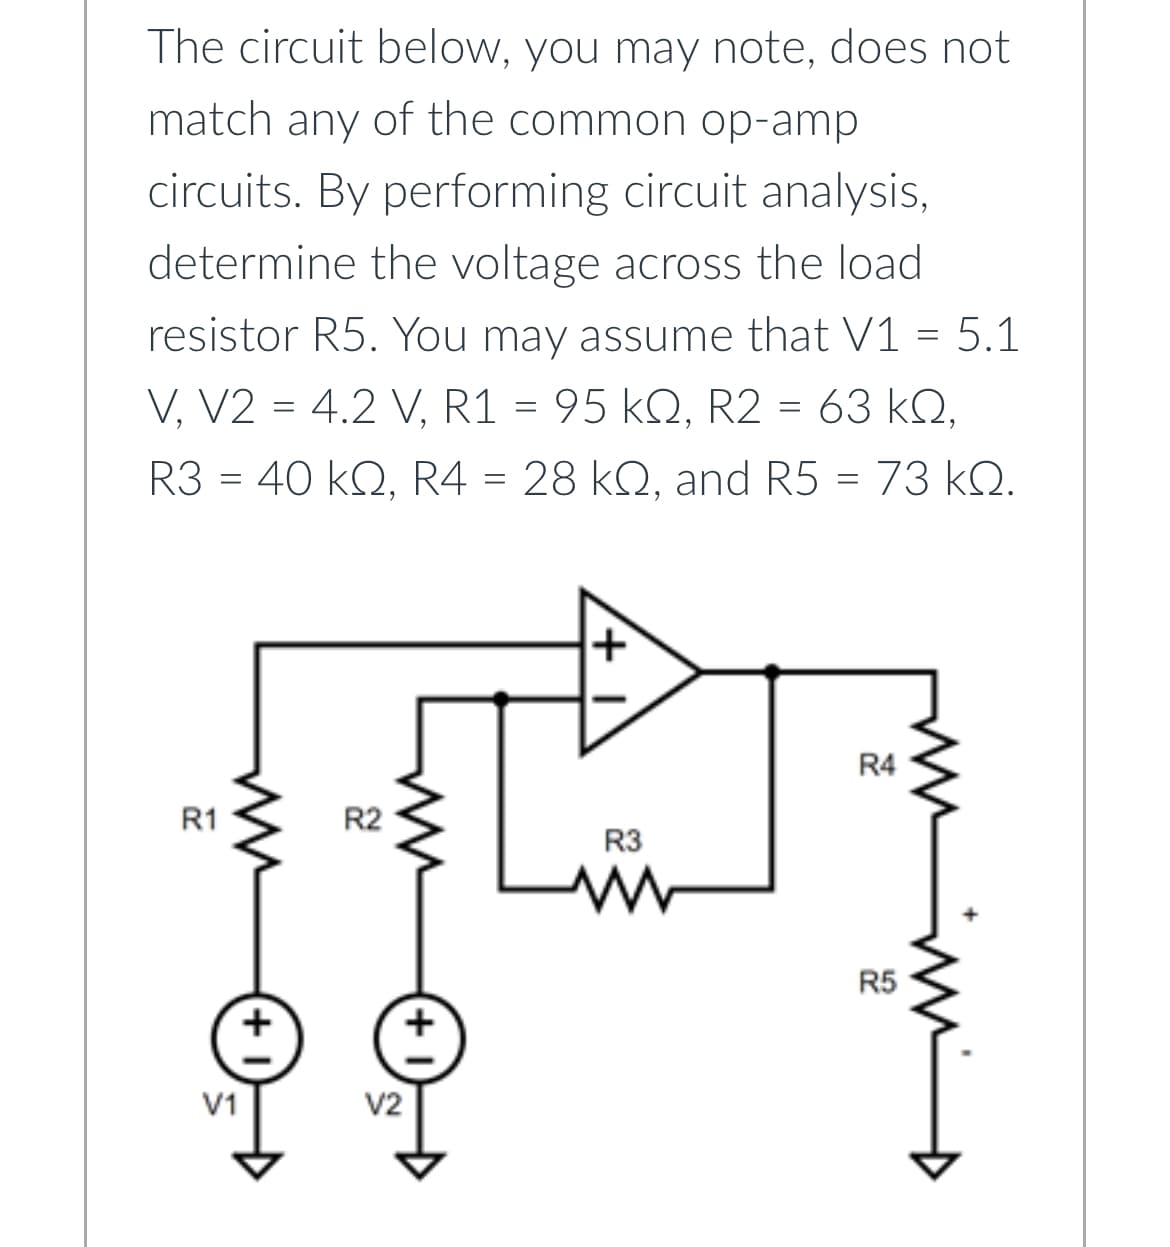 The circuit below, you may note, does not
match any of the common op-amp
circuits. By performing circuit analysis,
determine the voltage across the load
resistor R5. You may assume that V1 = 5.1
V, V2 = 4.2 V, R1 = 95 kQ, R2 = 63 KQ,
R3 = 40 kQ, R4 = 28 kQ, and R5 = 73 kQ.
R1
V1
R2
V2
+
+
R3
R4
R5
mn m